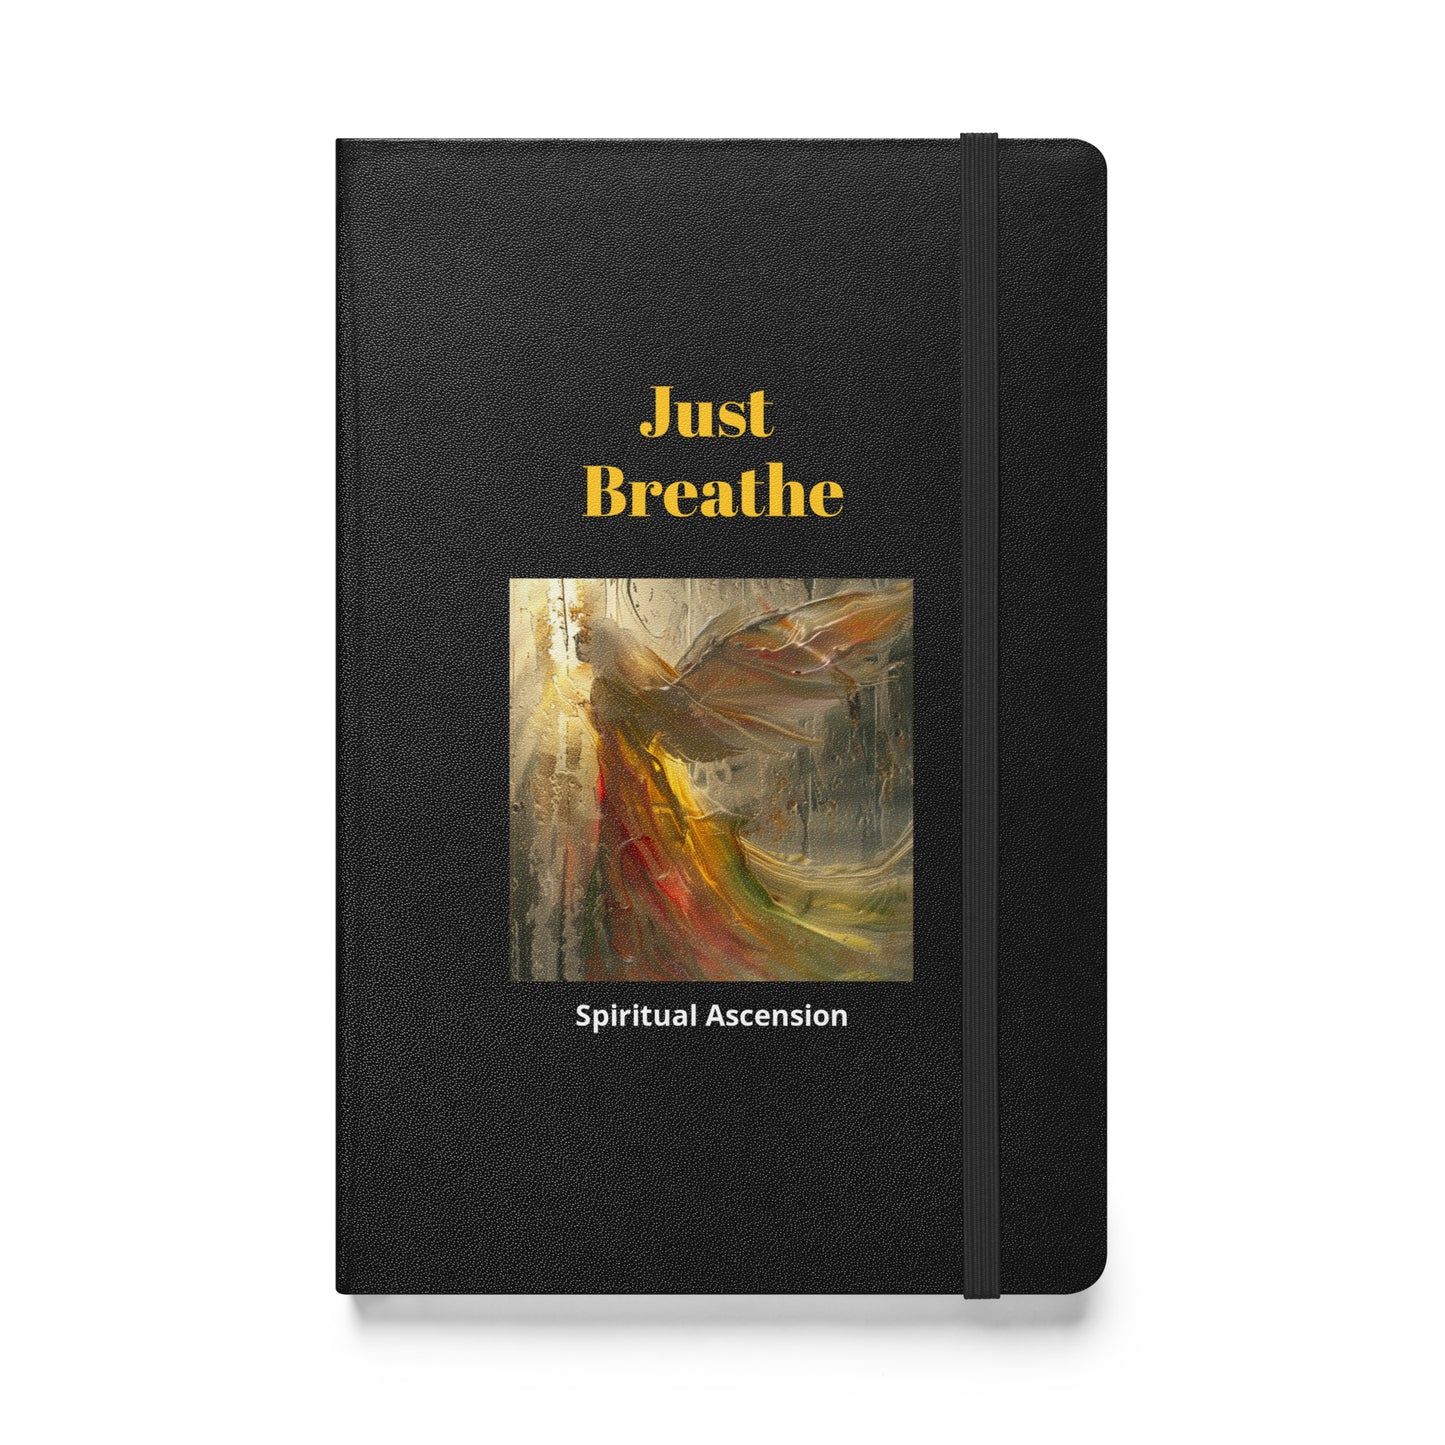 Hardcover bound notebook - 100% profit goes to Charity